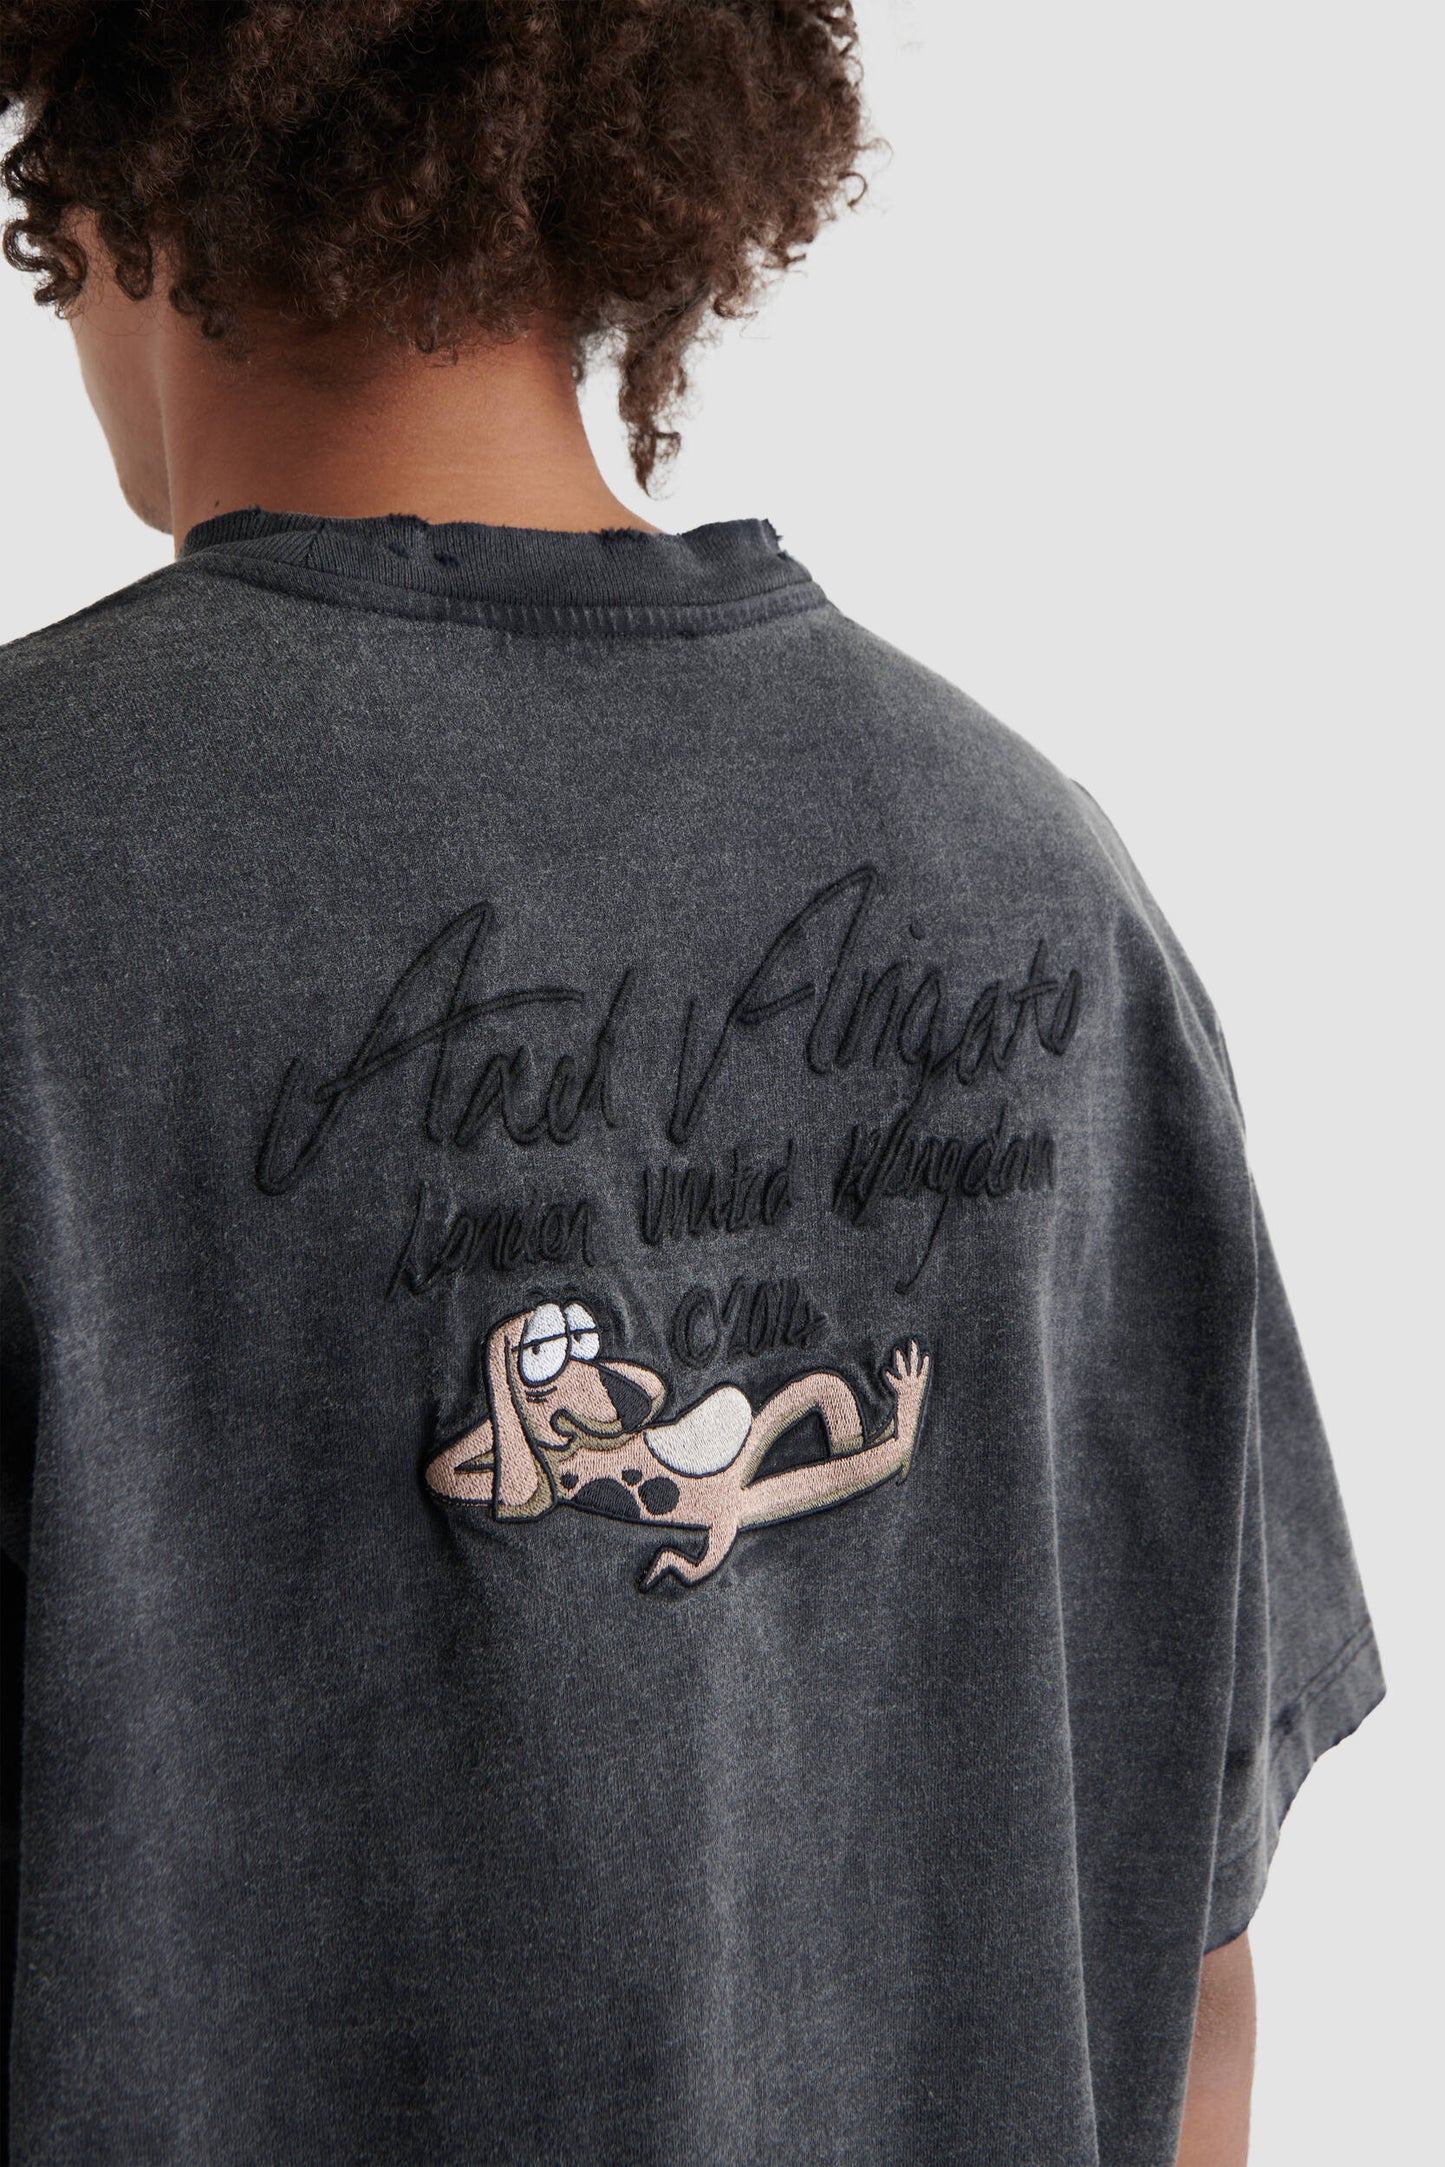 Axel Arigato T-shirt Wes Distressed